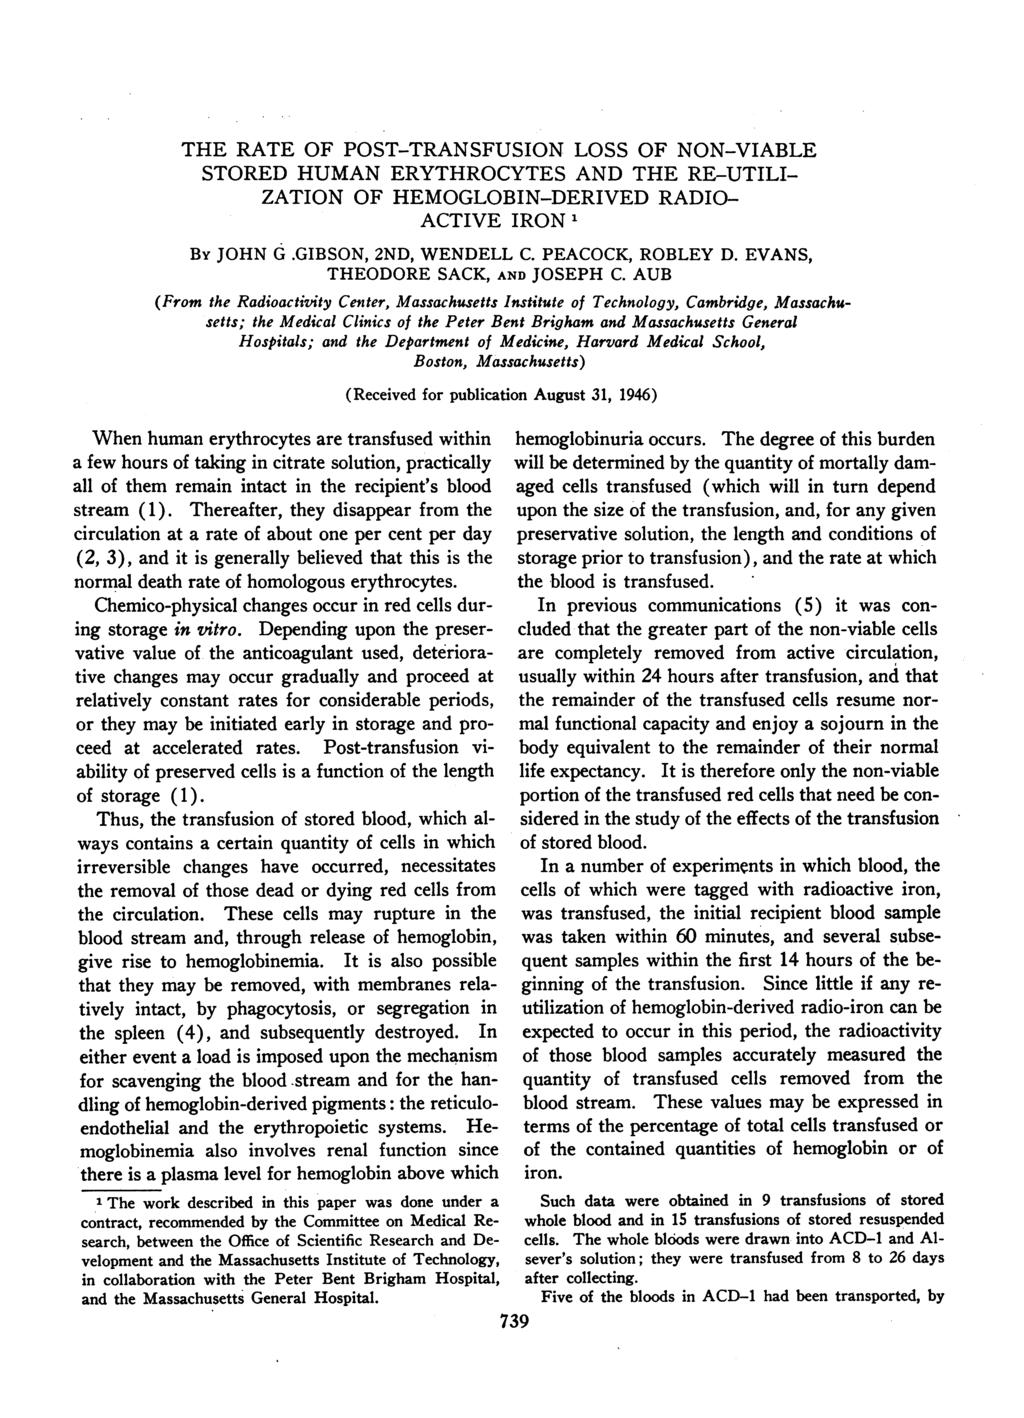 THE RATE OF POST-TRANSFUSION LOSS OF NON-VIABLE STORED HUMAN ERYTHROCYTES AND THE RE-UTILI- ZATION OF HEMOGLOBIN-DERIVED RADIO- ACTIVE IRON1 BY JOHN G.GIBSON, 2ND, WENDELL C. PEACOCK, ROBLEY D.